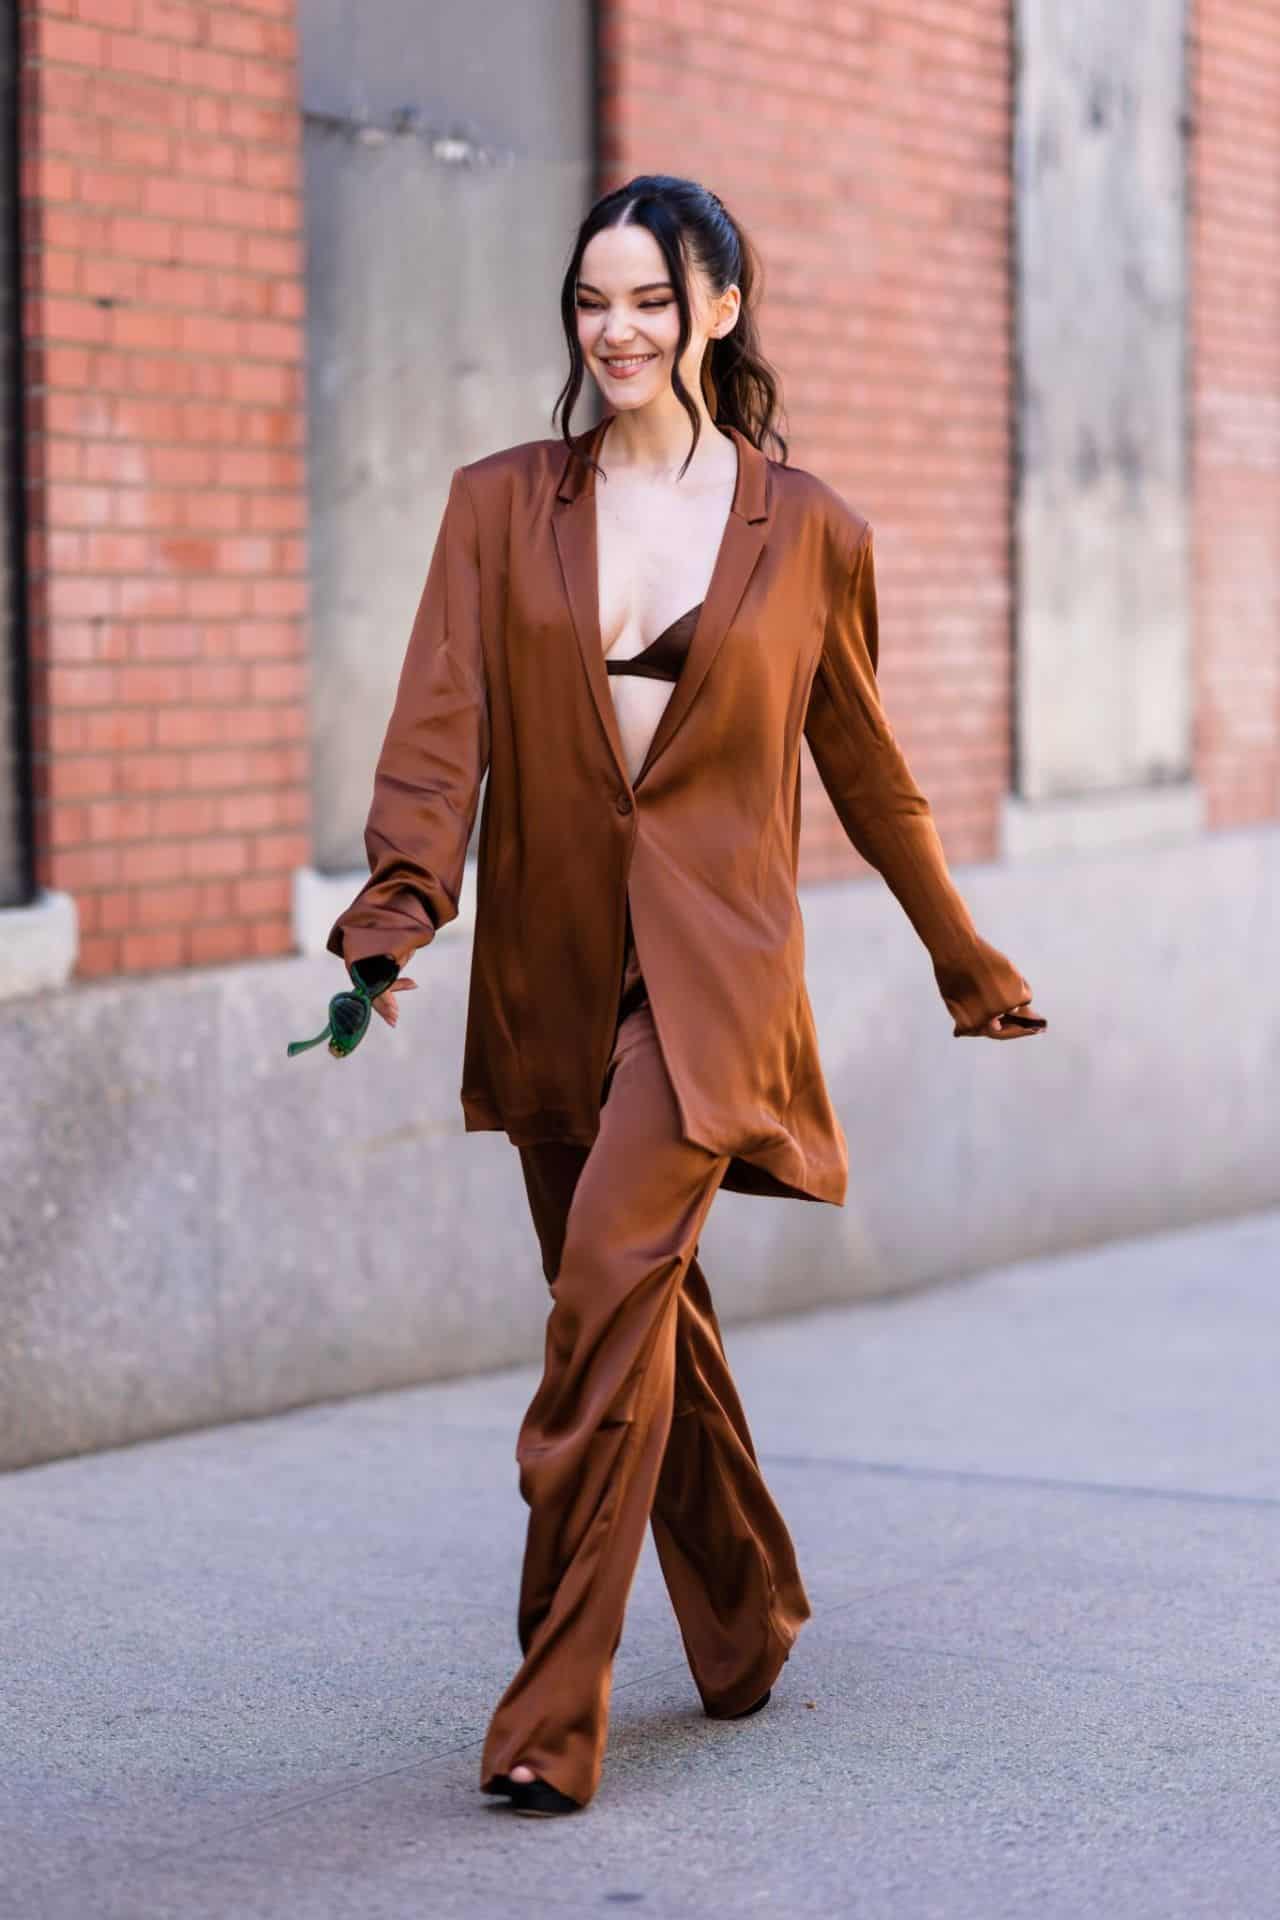 Dove Cameron Nails the Chic Look in Bronze Pantsuit in New York City